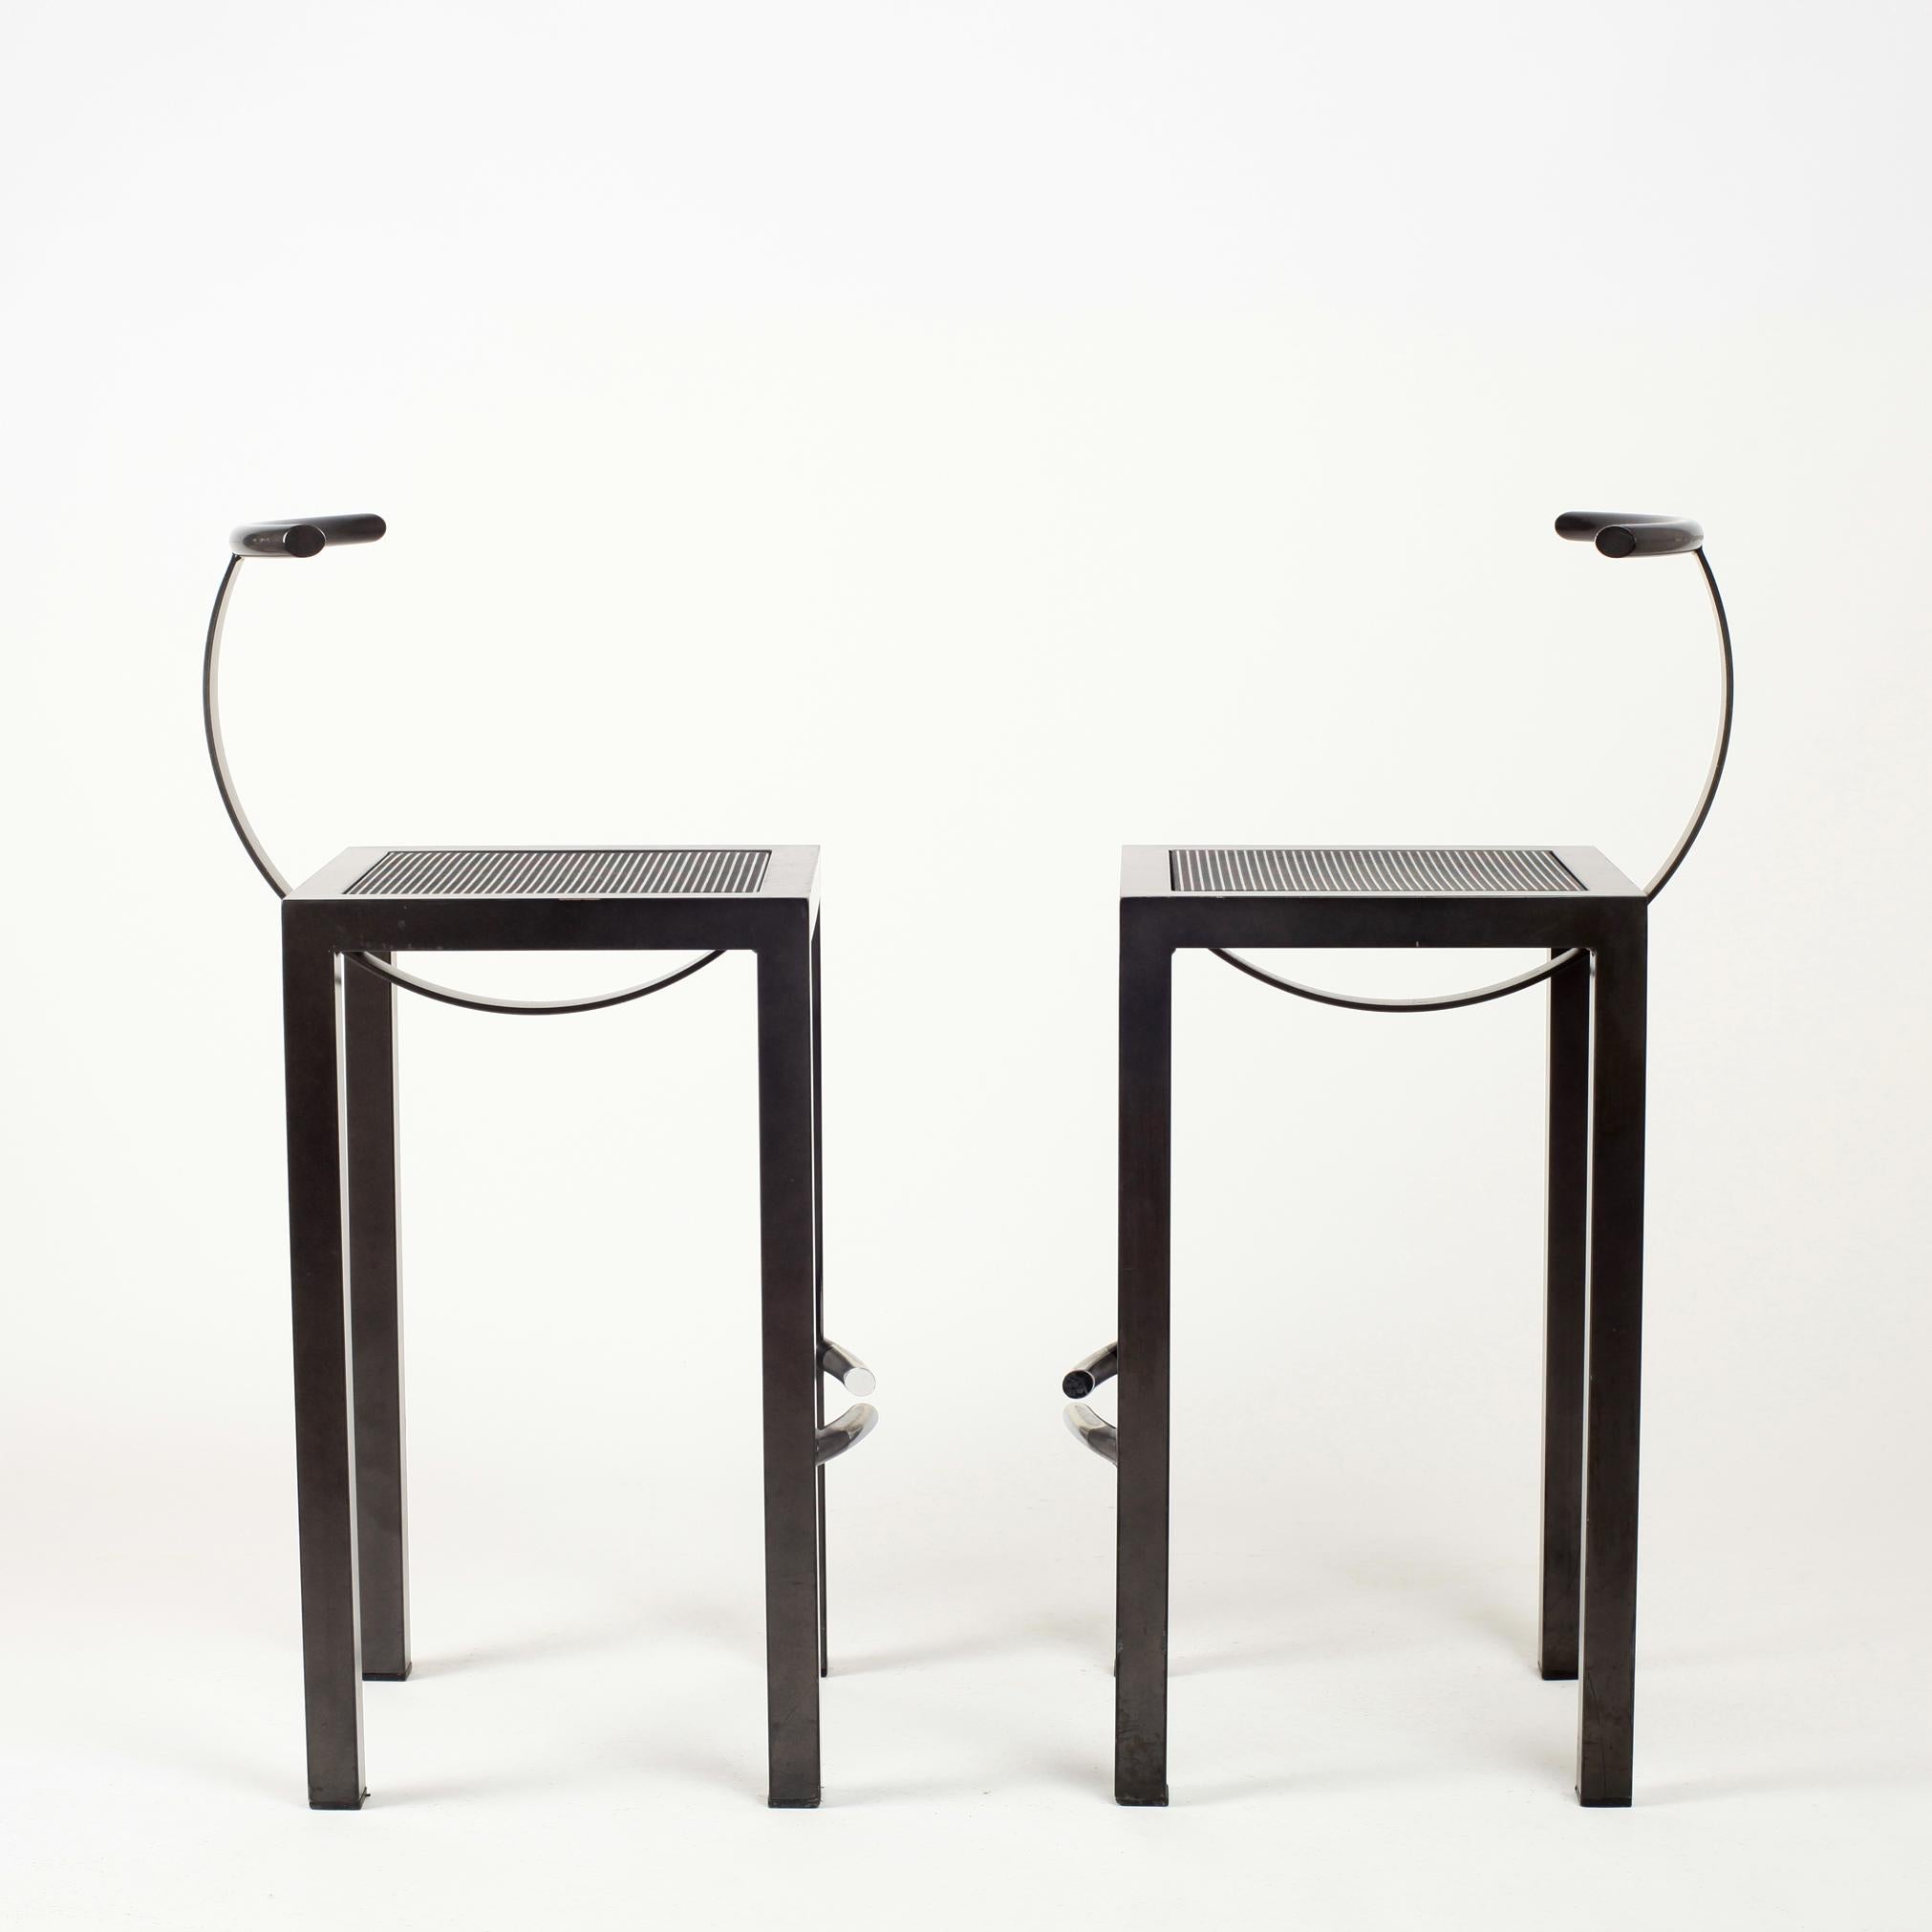 Philippe Sarck Sarapis barstools for Driade, 1986
Dark grey steel
No longer manufactured

Bibliography: Similar model reproduced in:
- Charlotte & Peter Fiell, 1000 chairs, Taschen Edition.